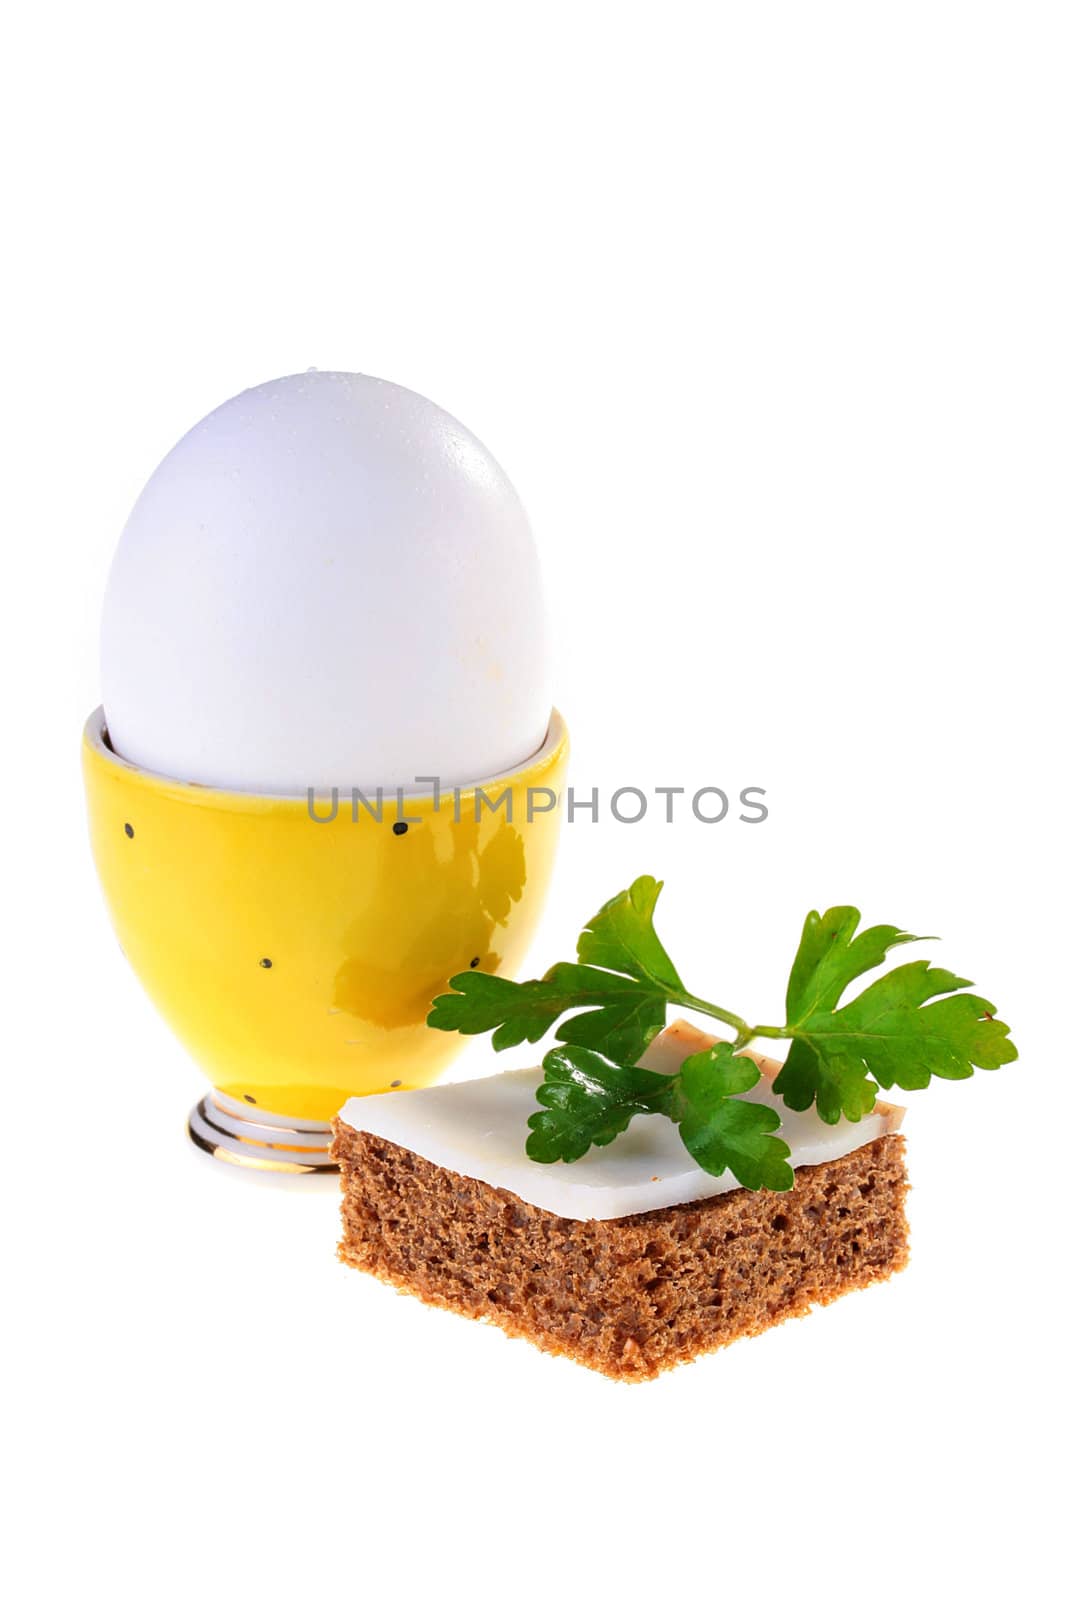 Egg in a yellow support with bread and bacon.